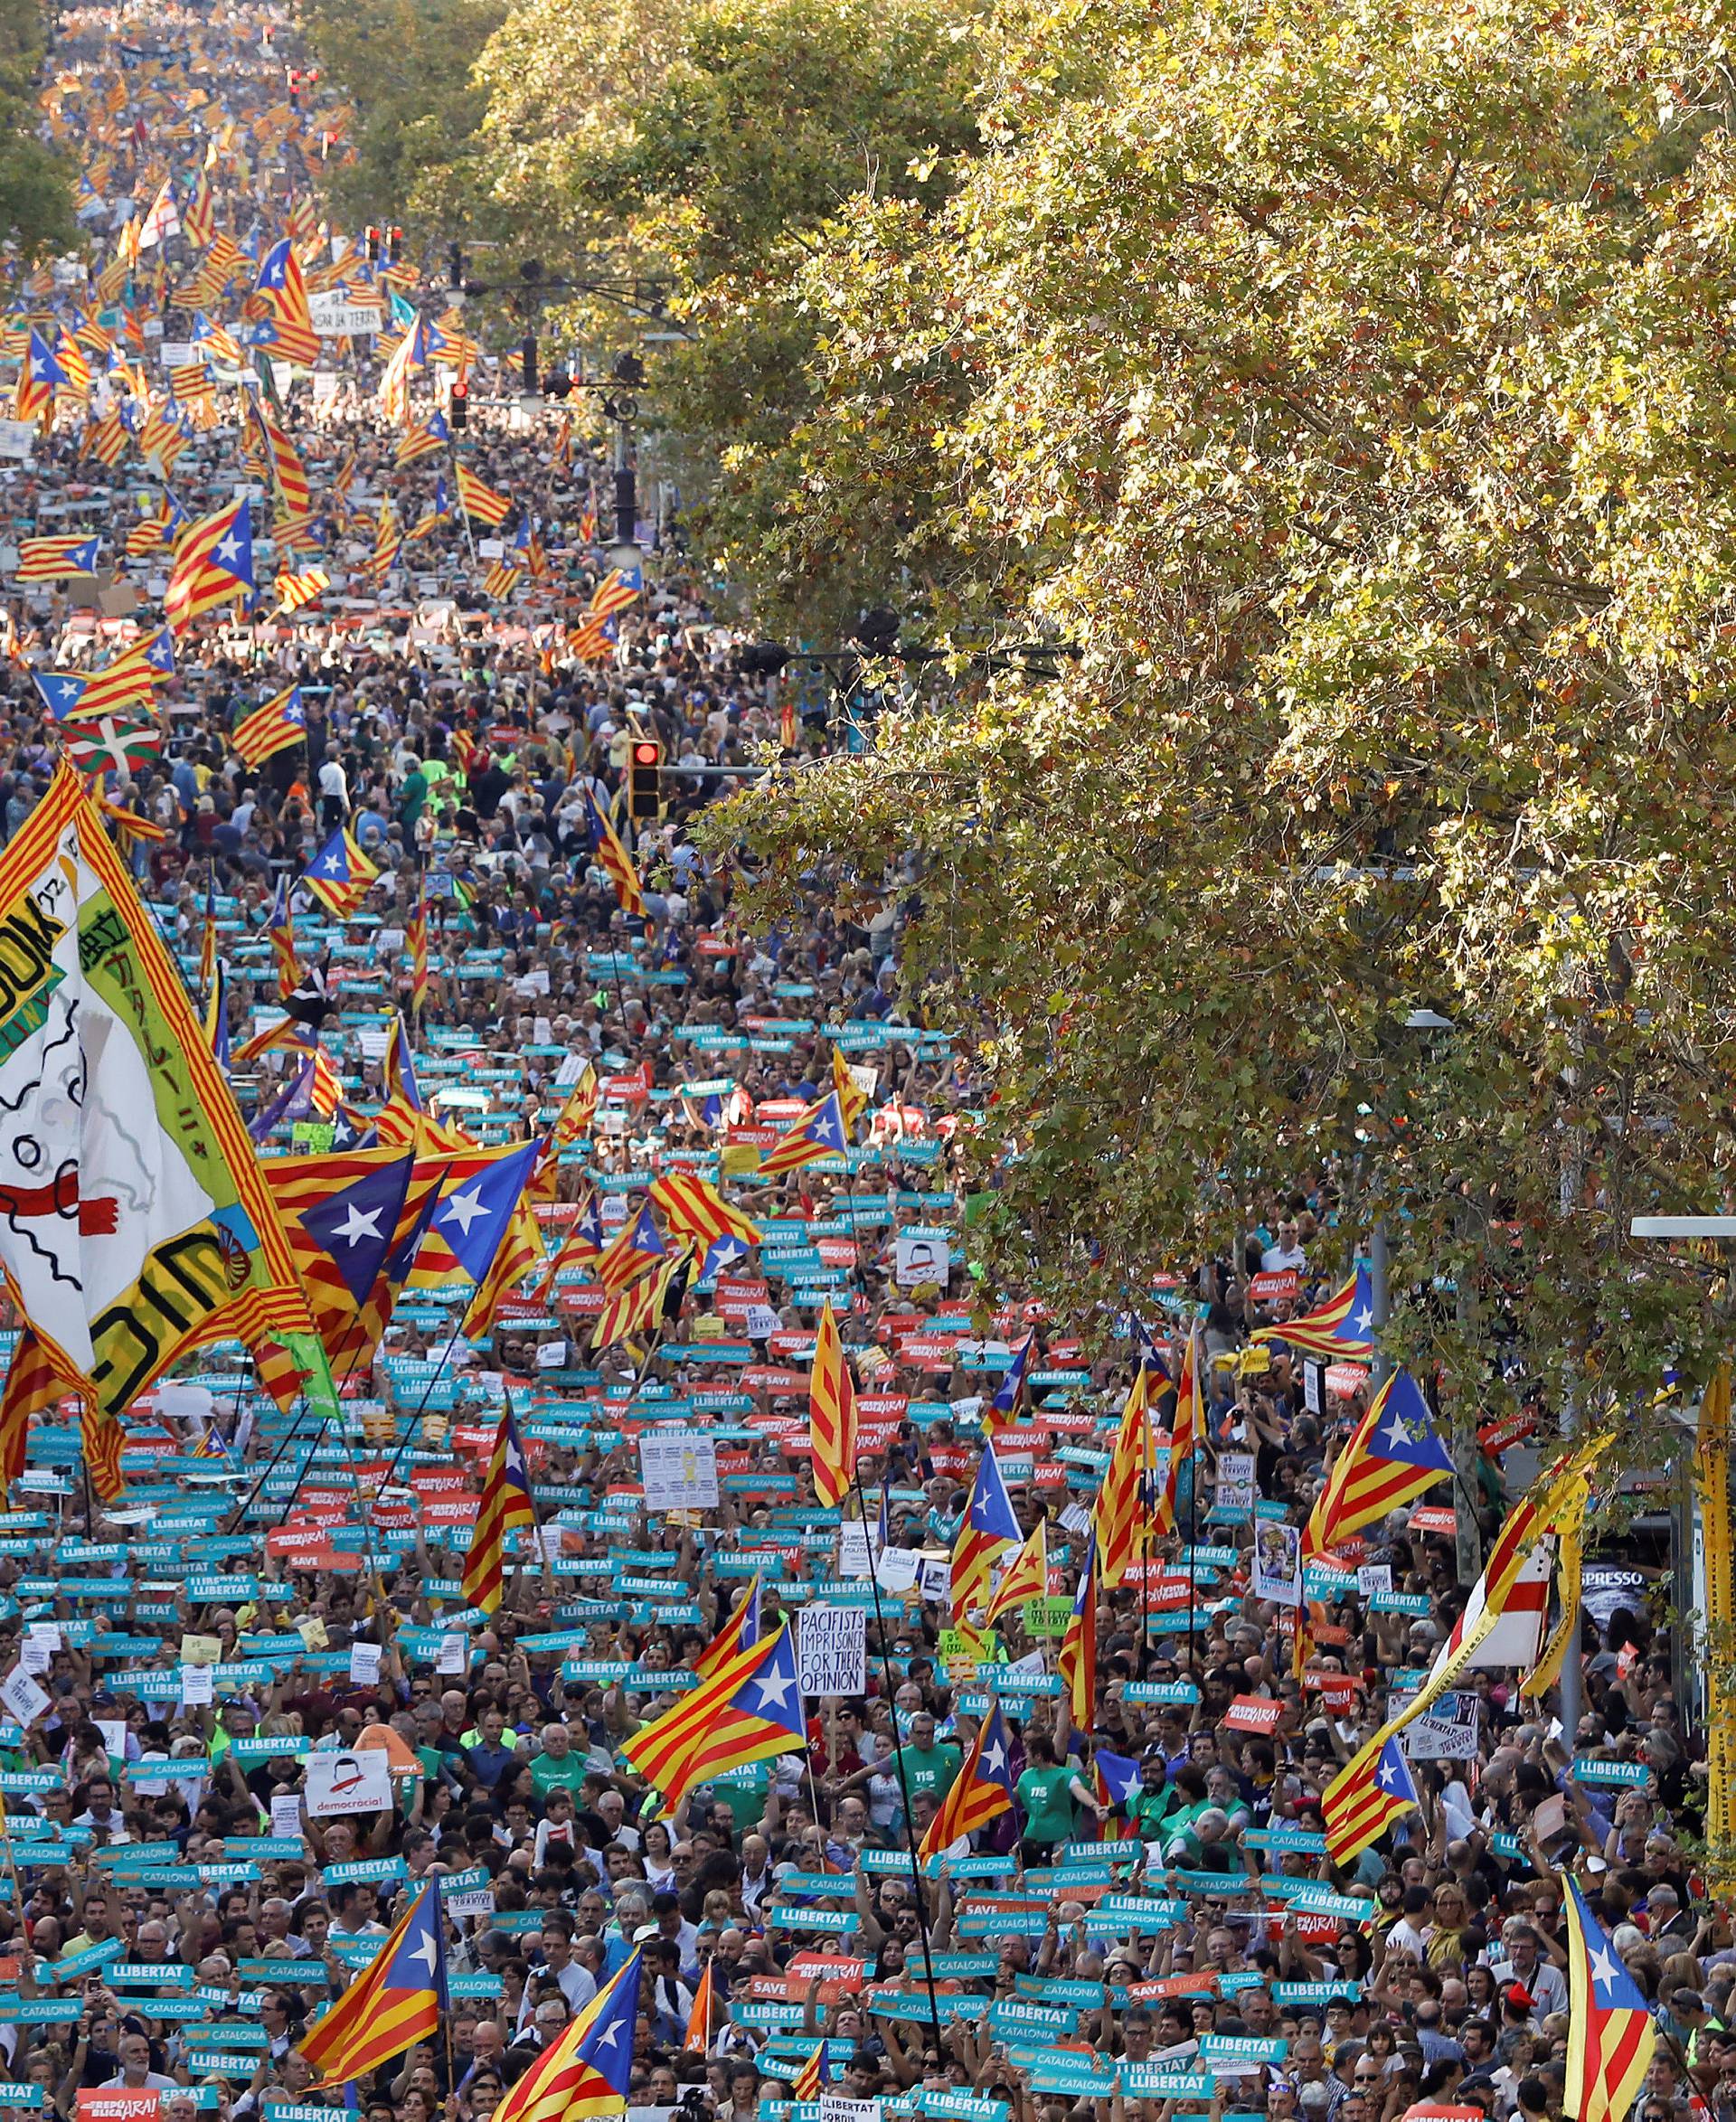 People wave Catalan separatist flags during a demonstration organised by Catalan pro-independence movements ANC (Catalan National Assembly) and Omnium Cutural, following the imprisonment of their two leaders Jordi Sanchez and Jordi Cuixart, in Barcelona